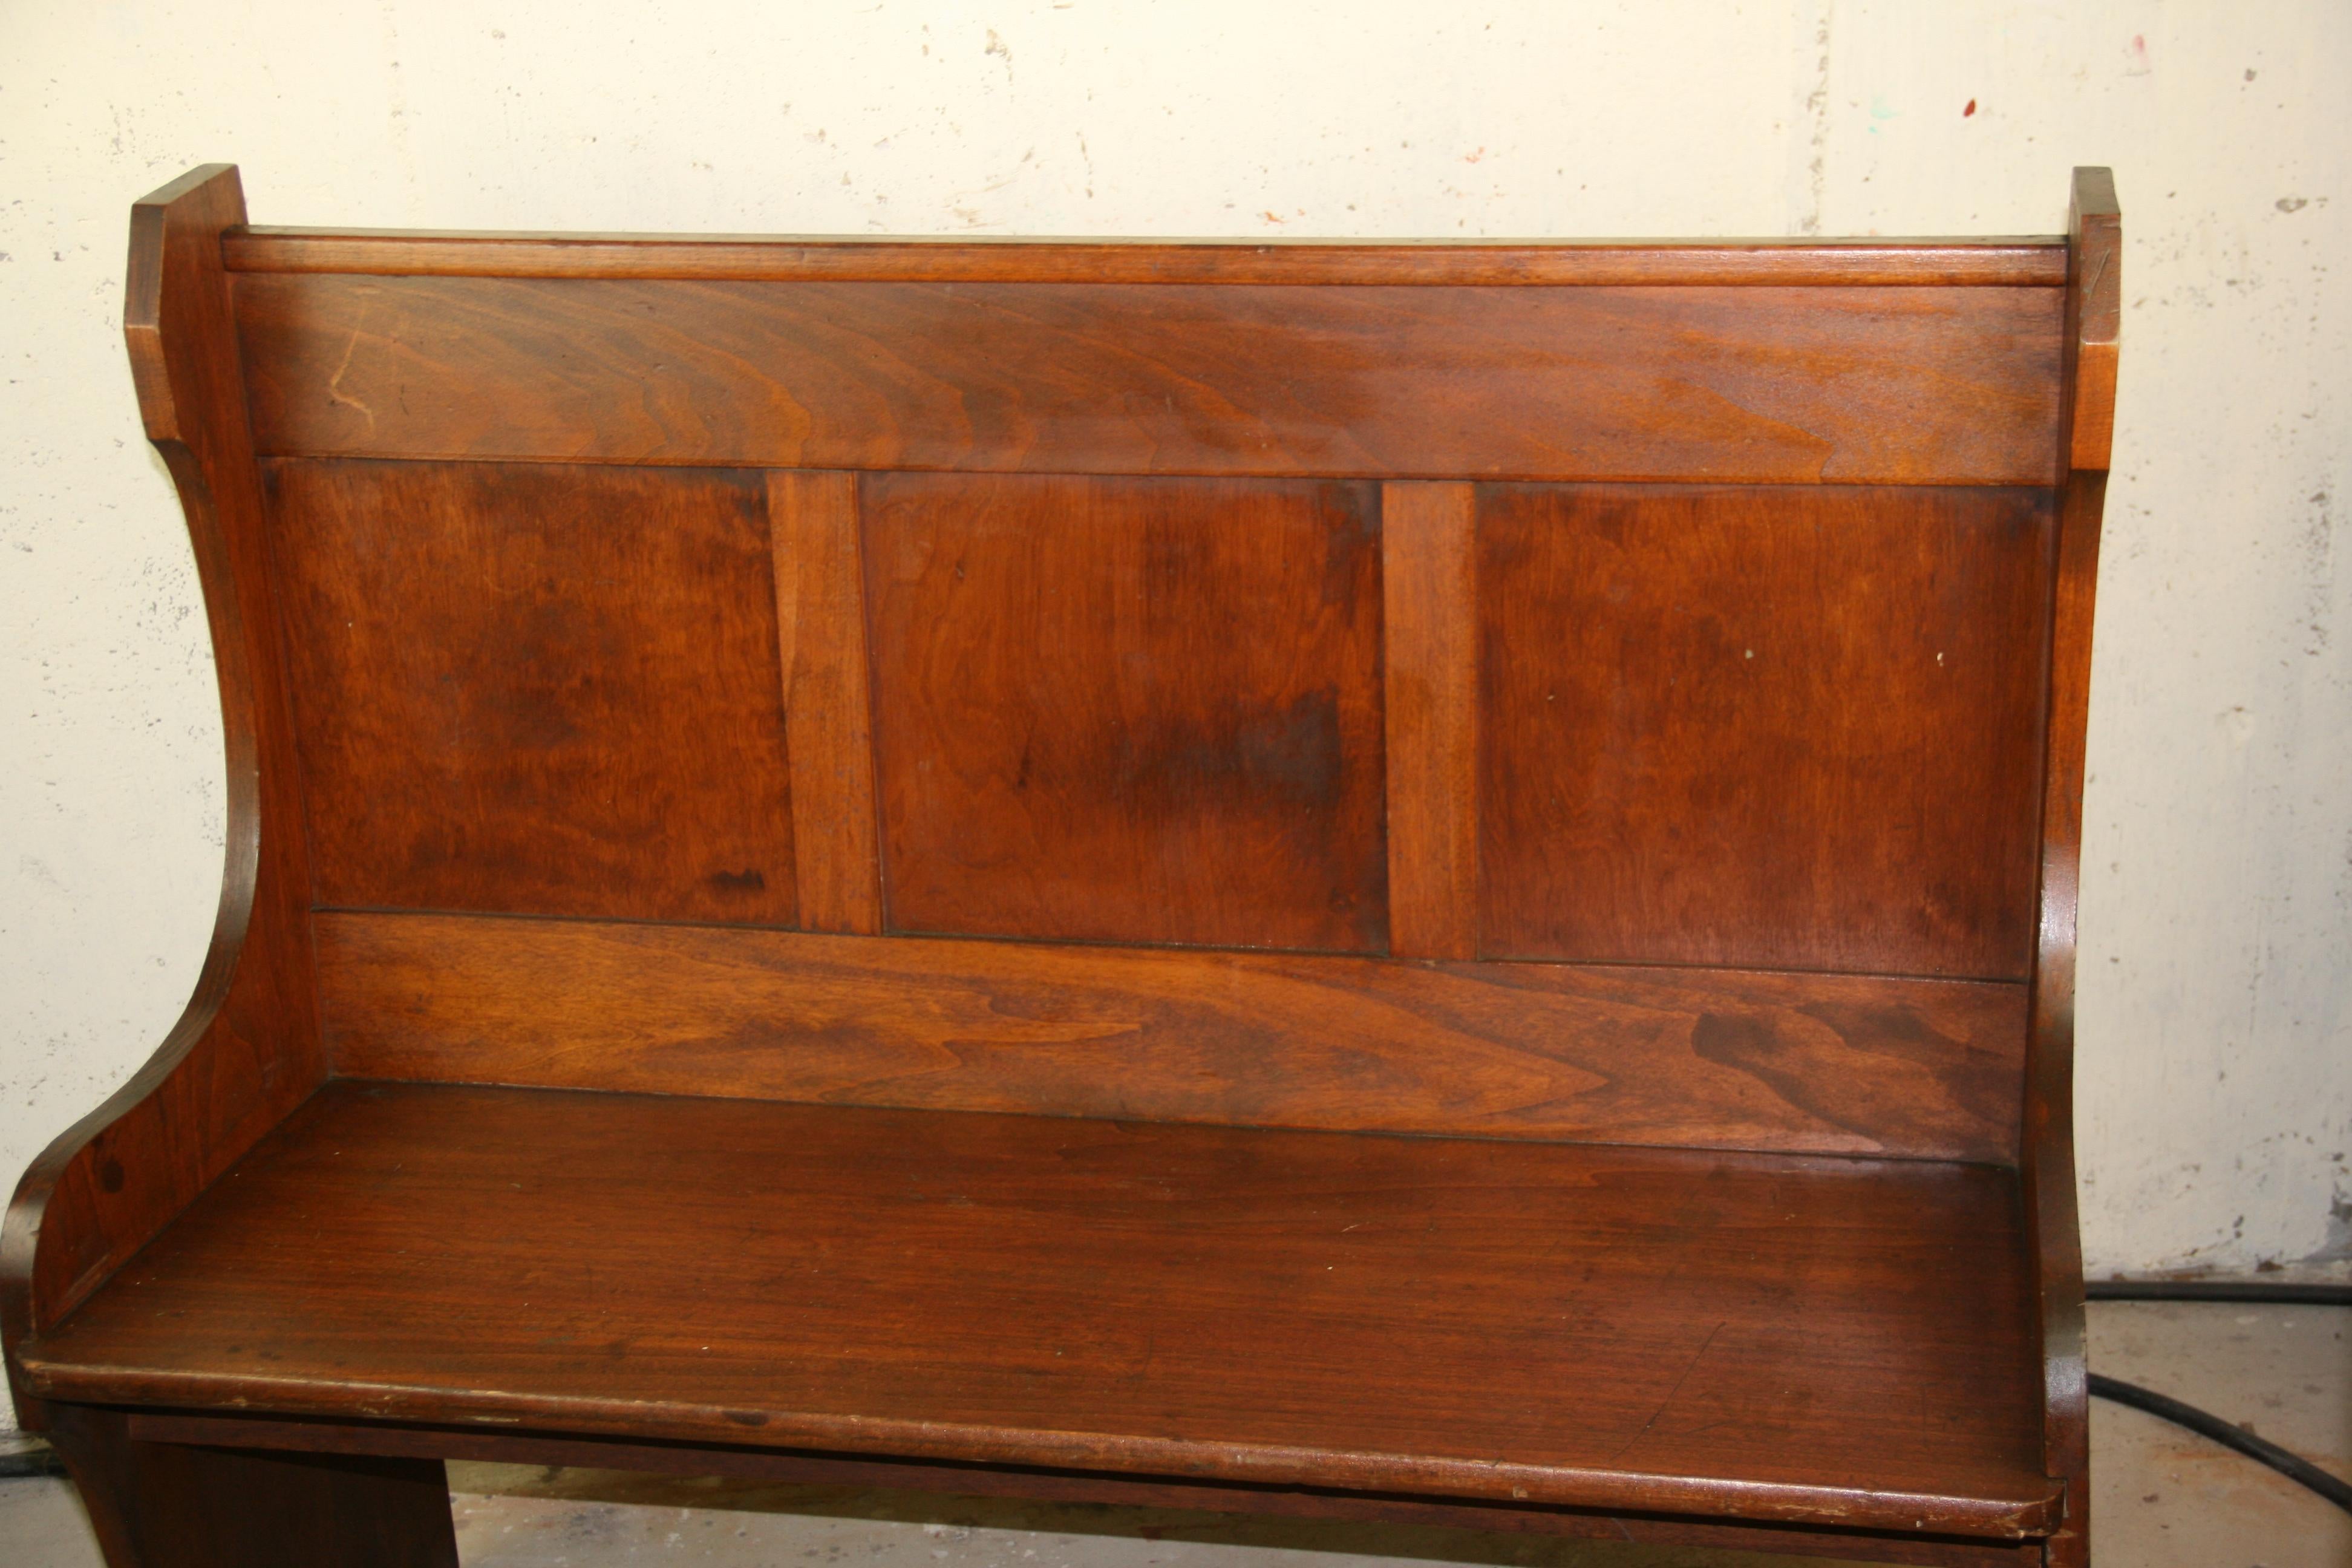 Early 20th Century English Paneled Hall Settle/Bench 1920's